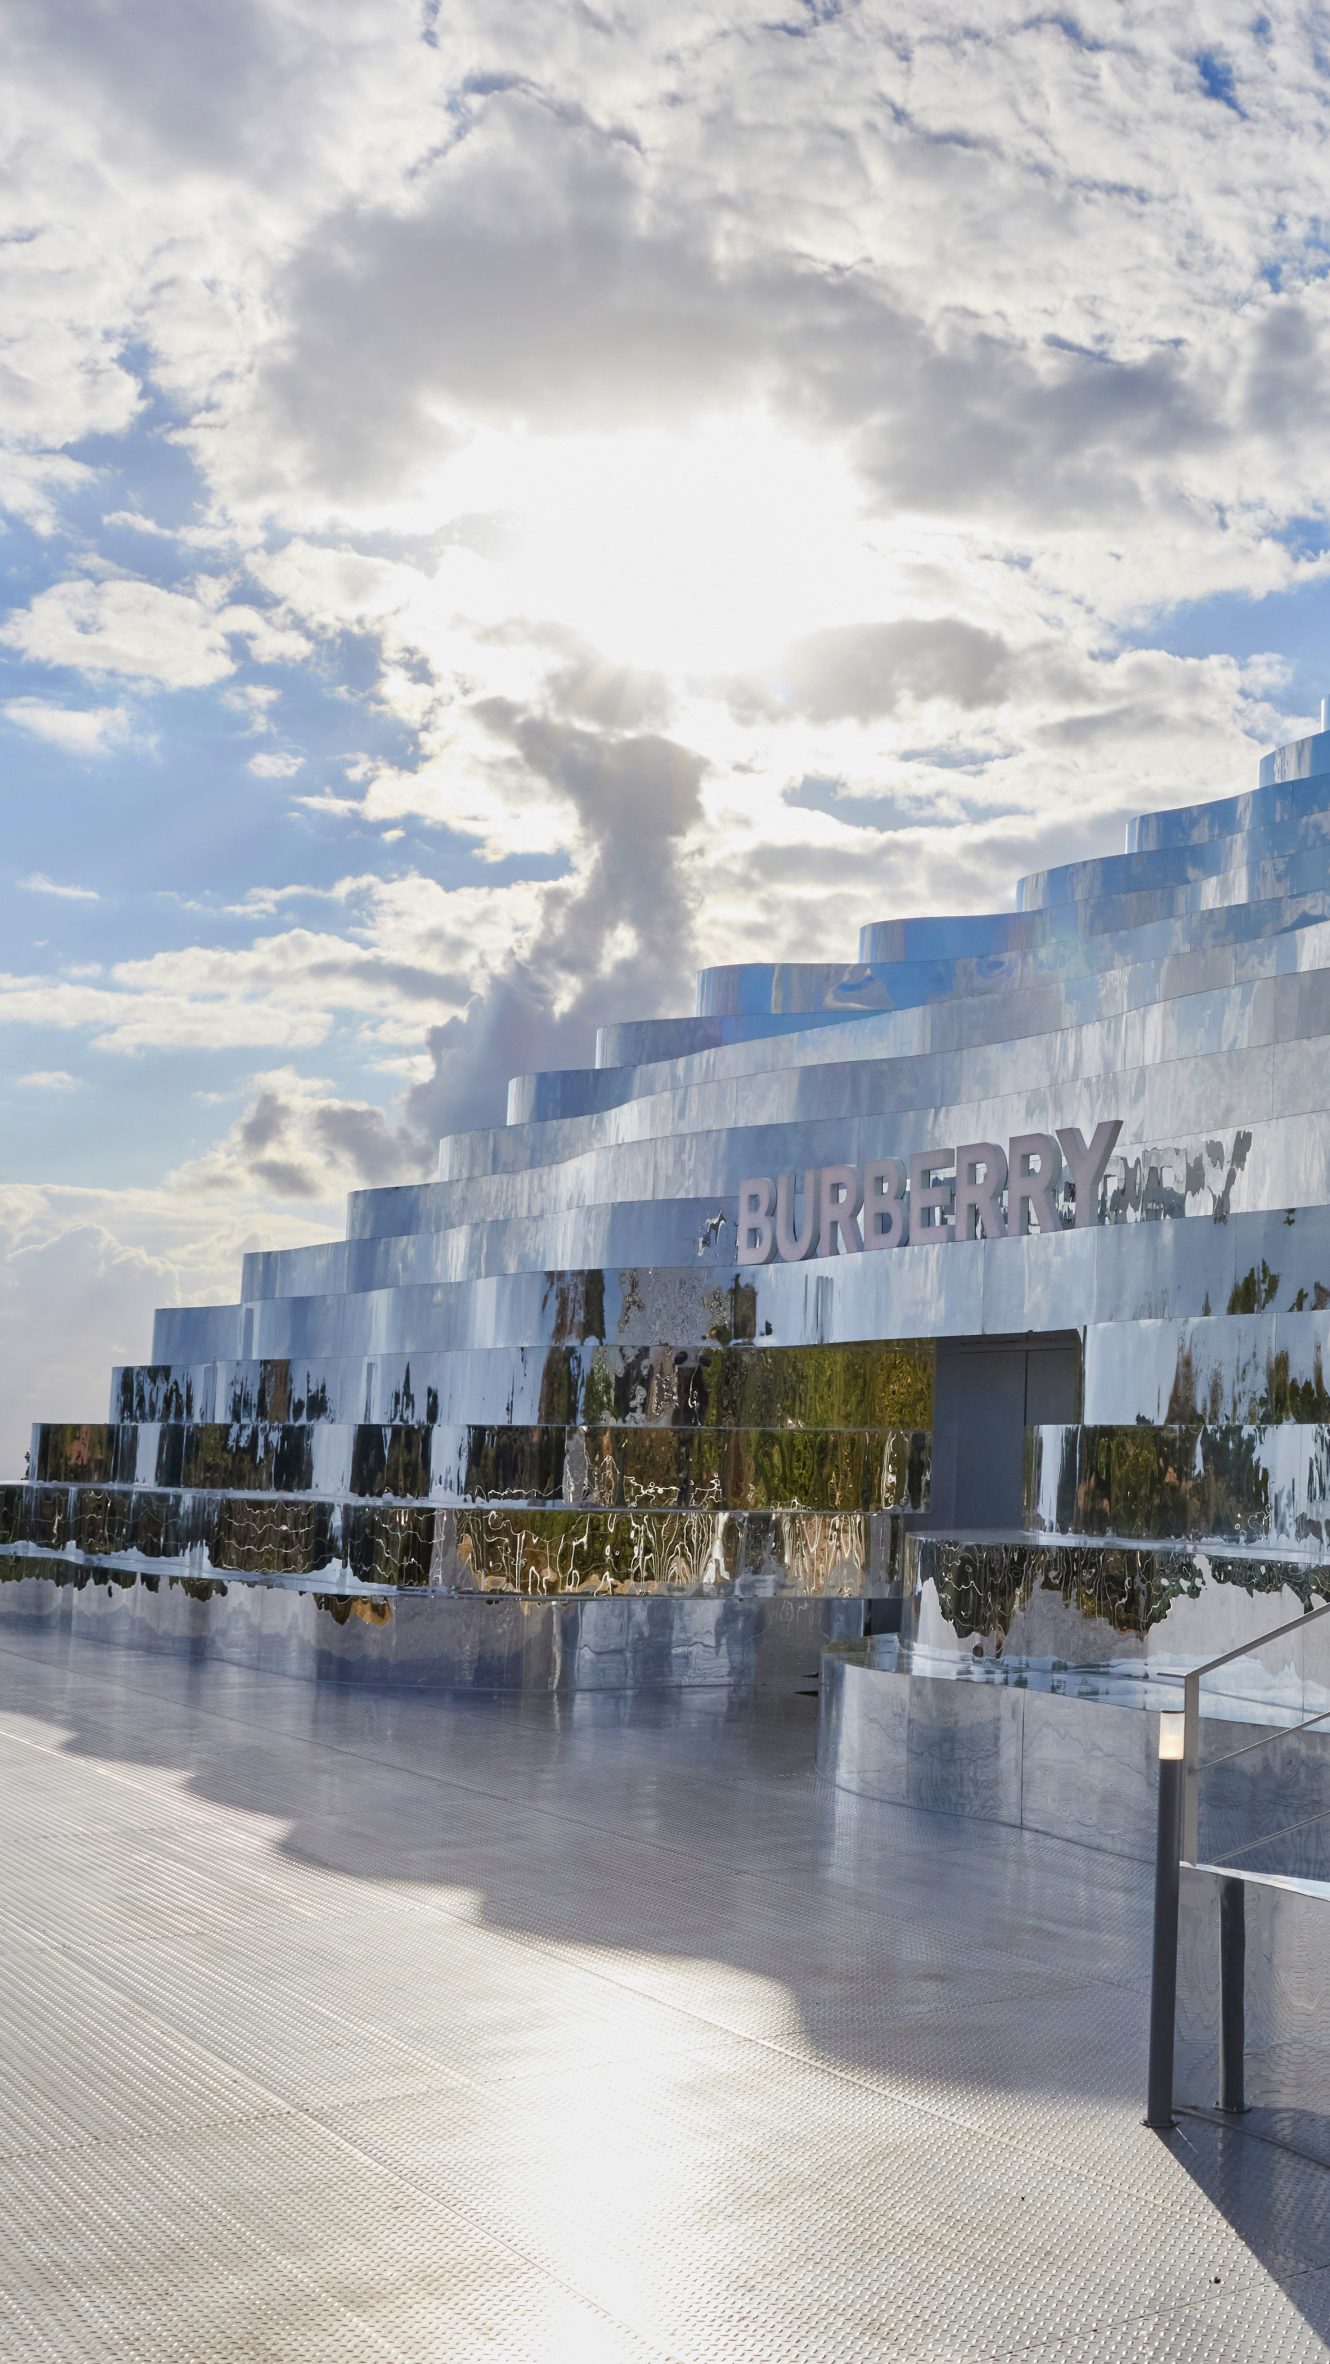 Imagine Landscapes pop-up shop with the word Burberry on the outside